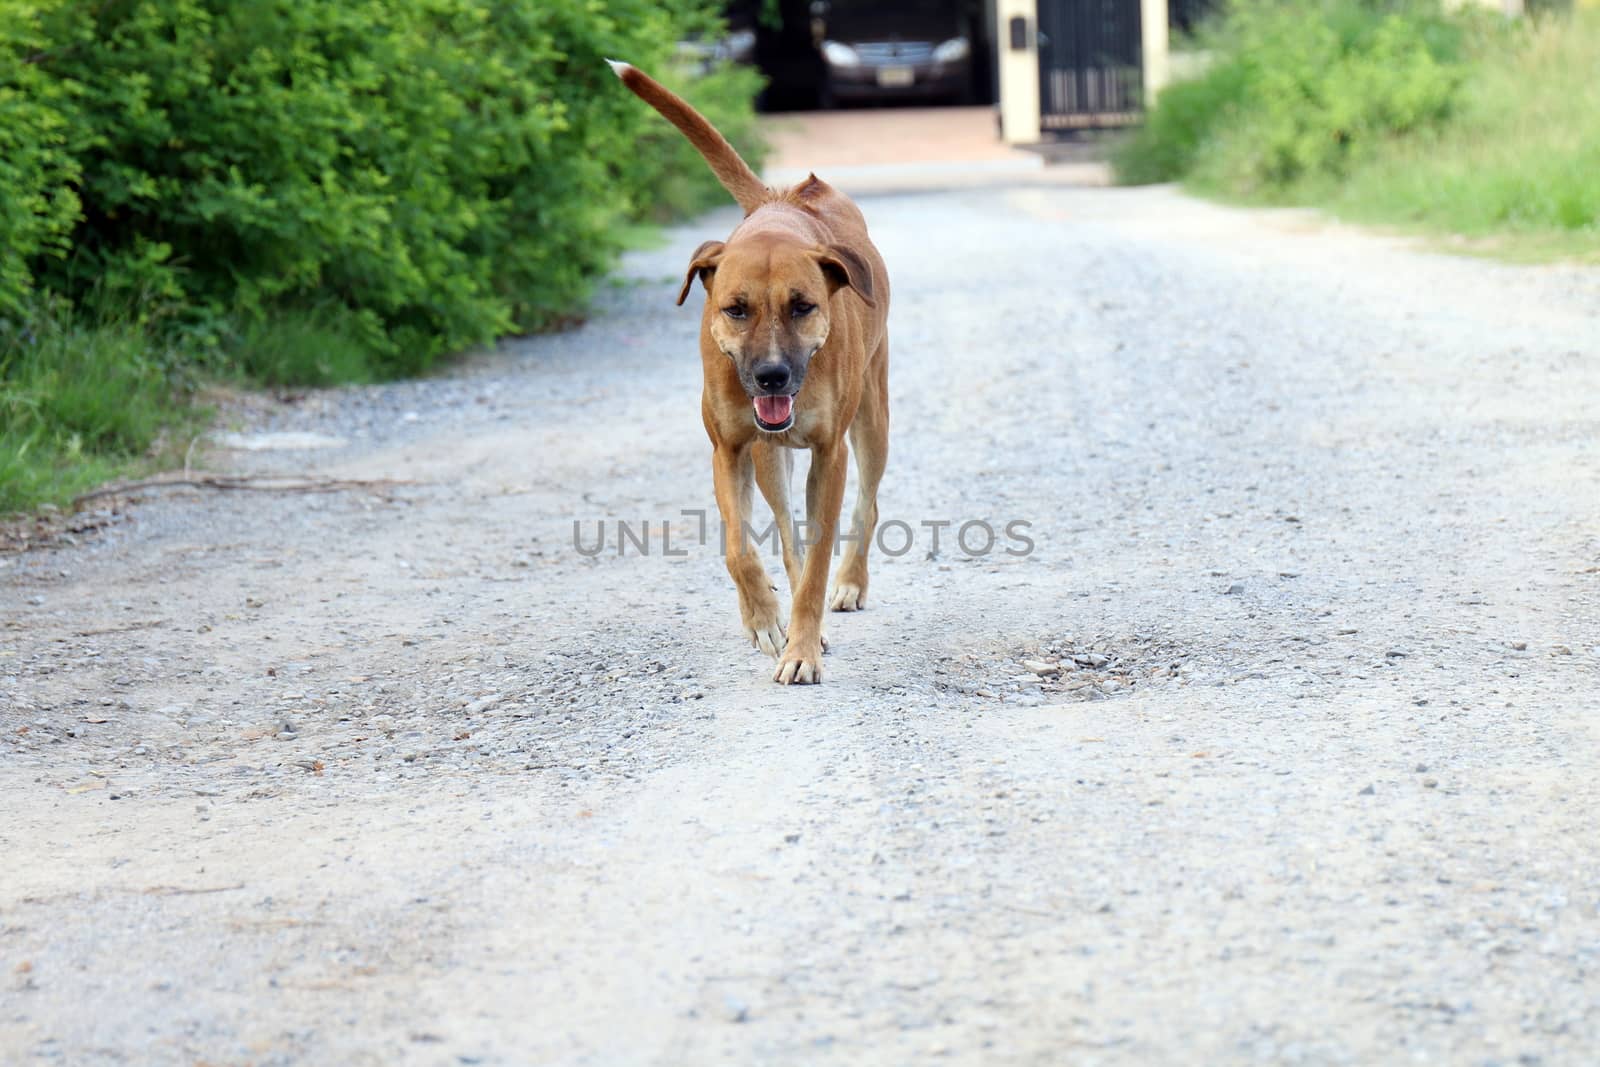 Dog, Brown dog good mood Walking in front and smiling dog by cgdeaw